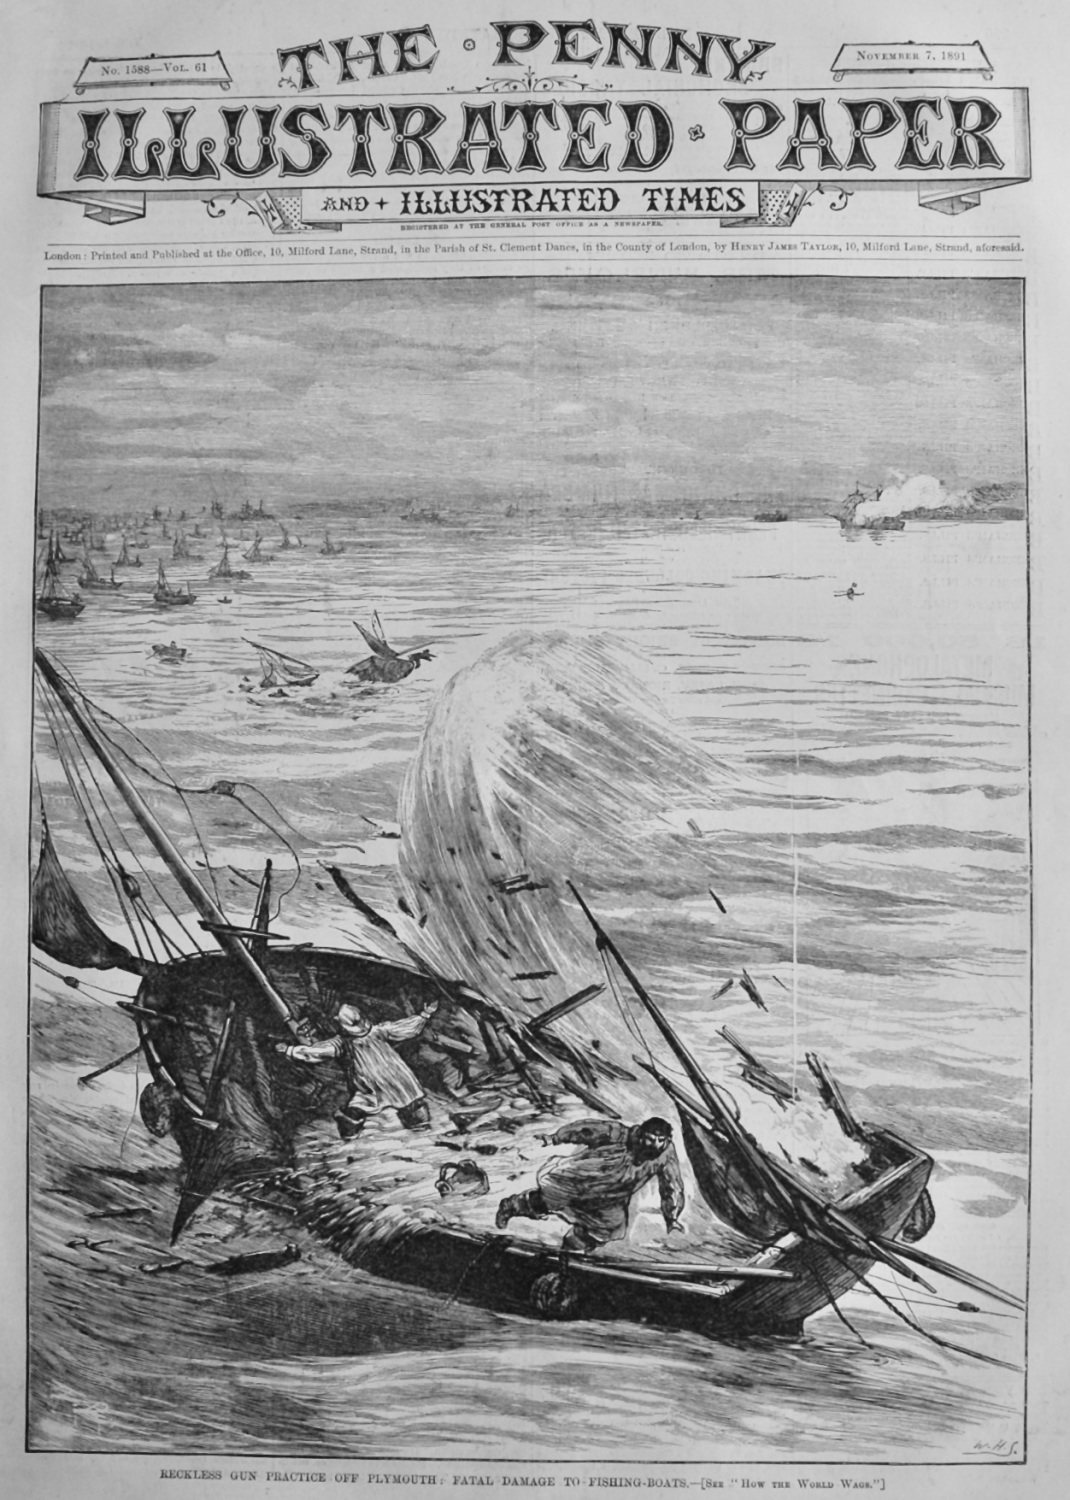 Reckless Gun Practice off Plymouth :  Fatal Damage to Fishing-Boats.  1891.